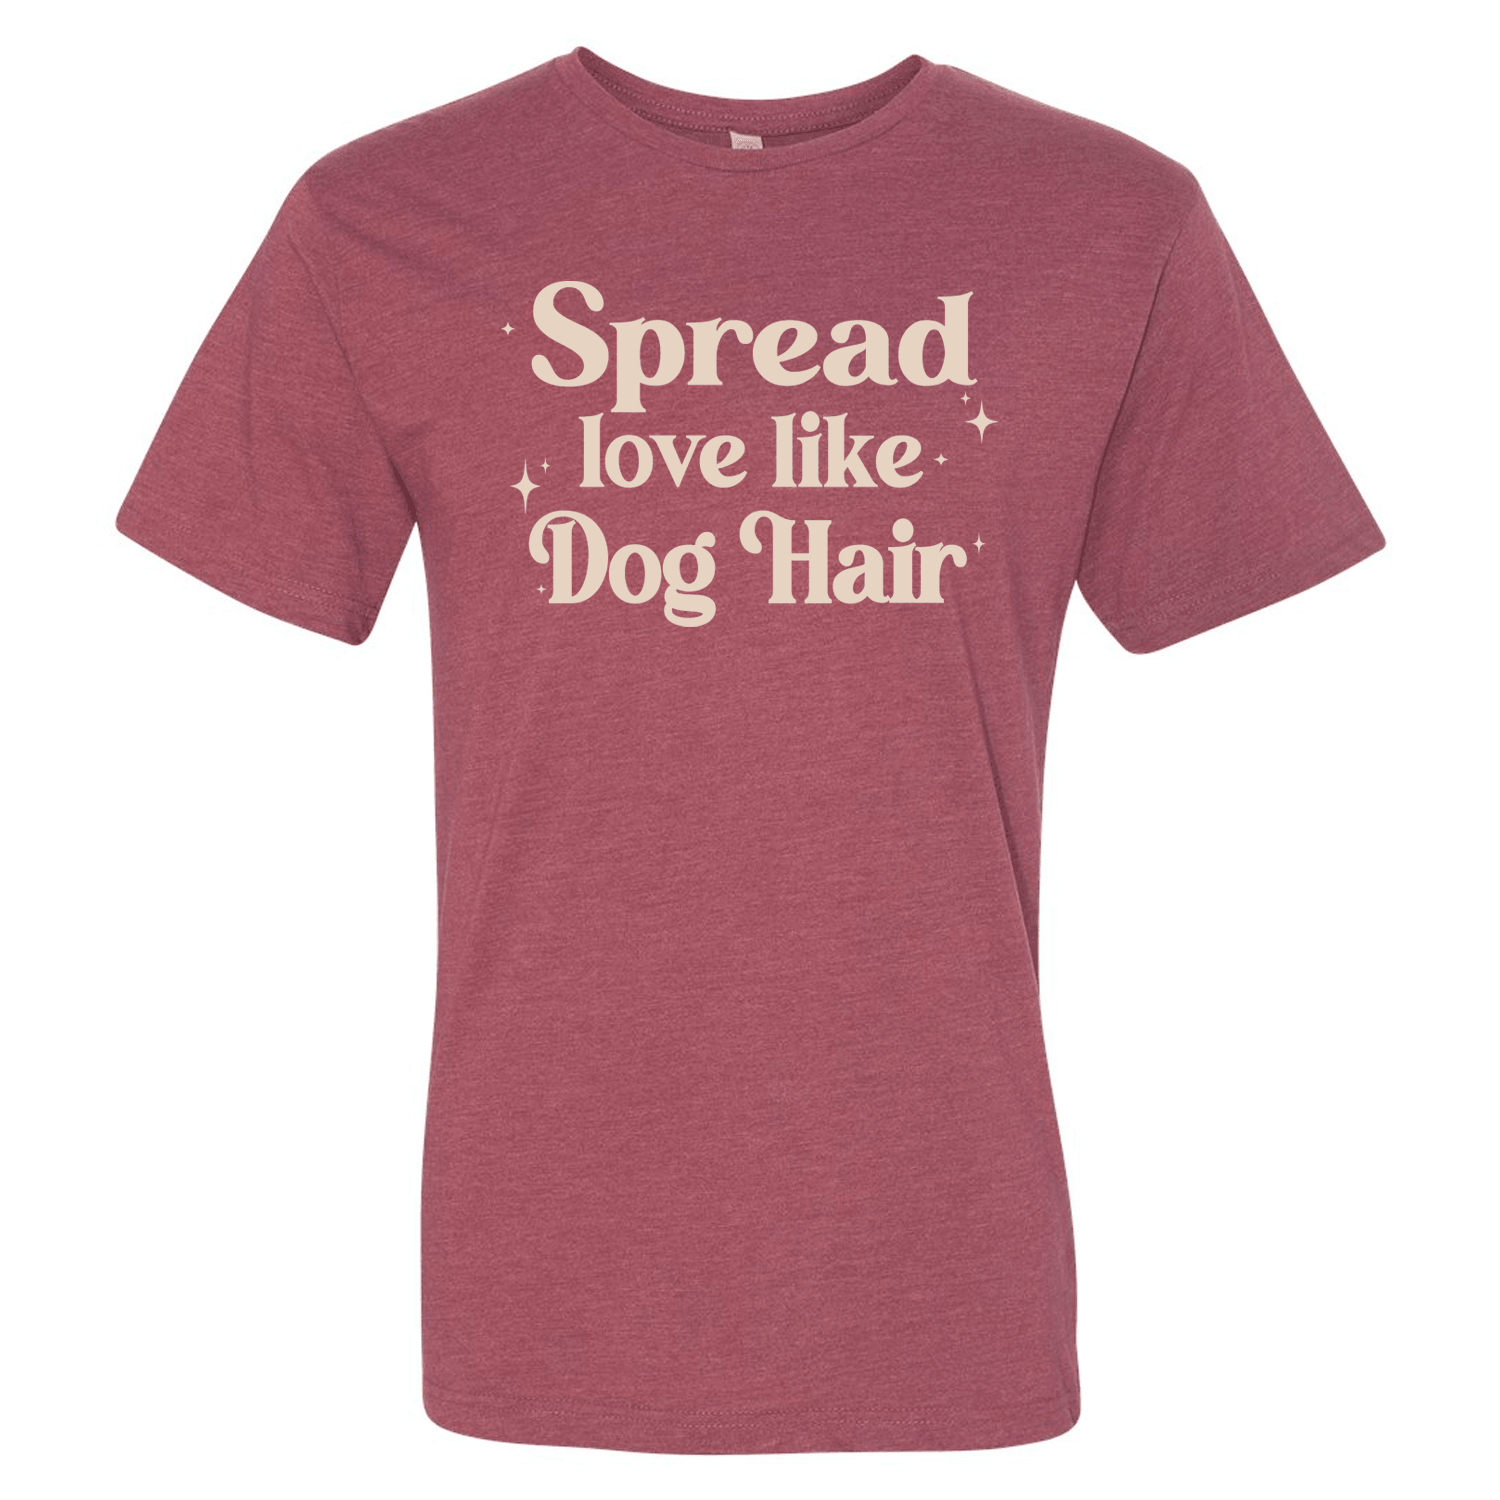 Spread Love like Dog Hair T-Shirt - Ales to Trails